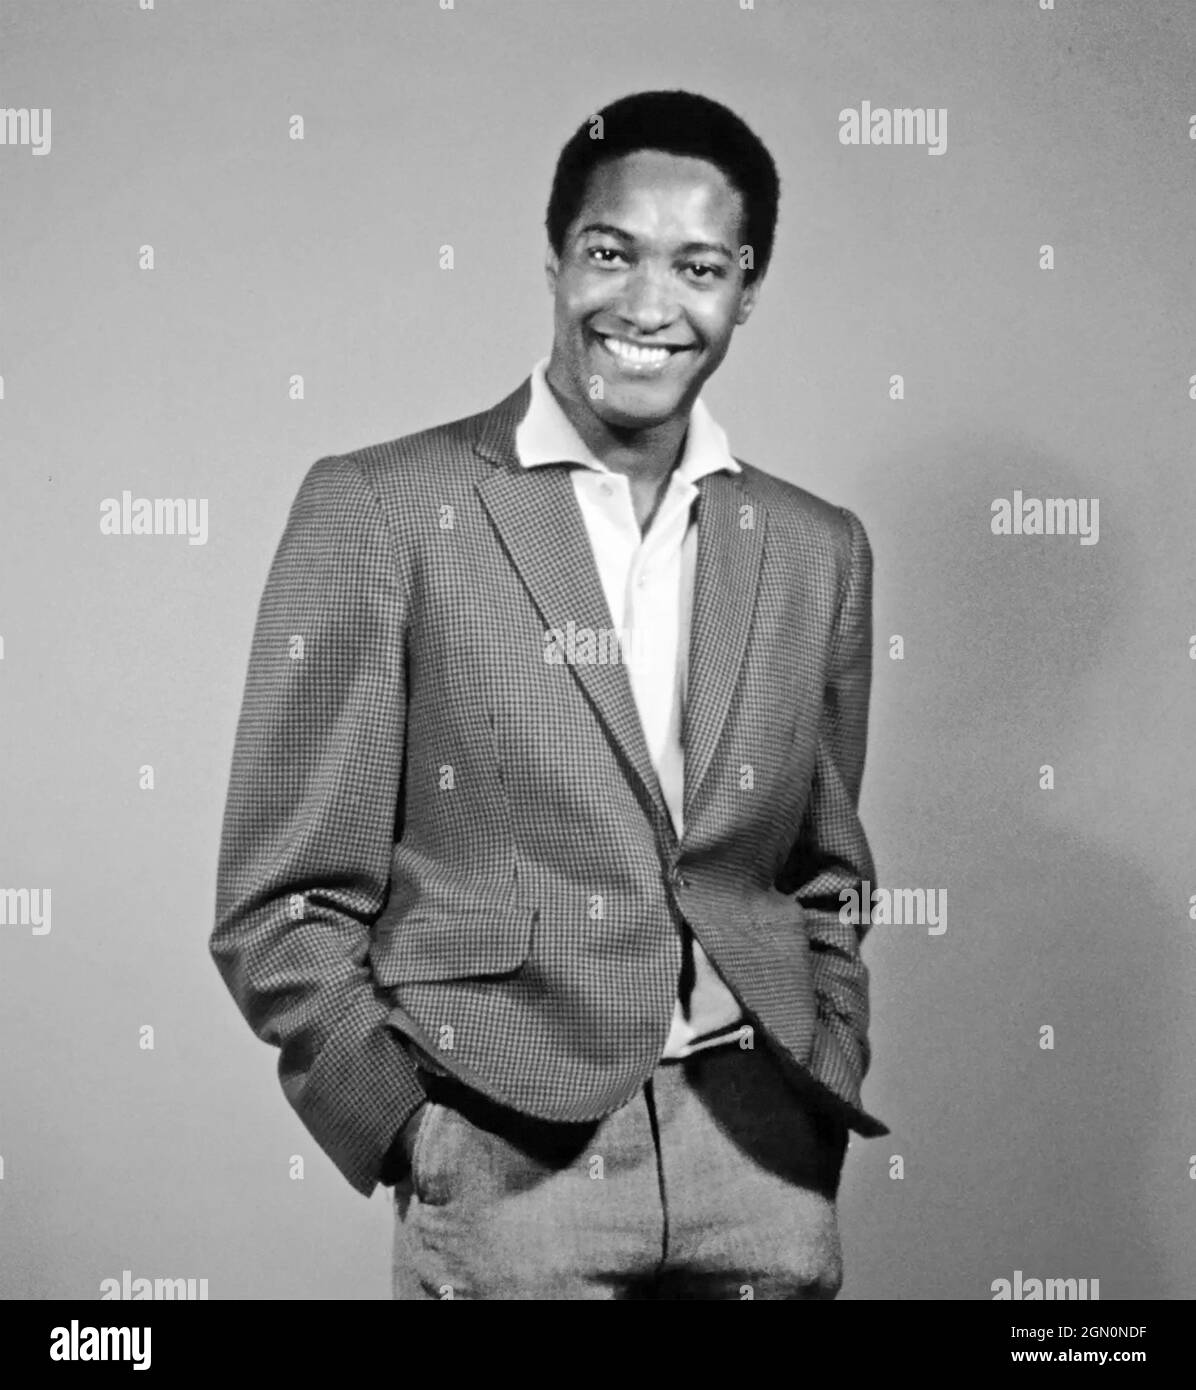 SAM COOKE (1931-1964) Promotional photo of American singer about 1963 Stock Photo